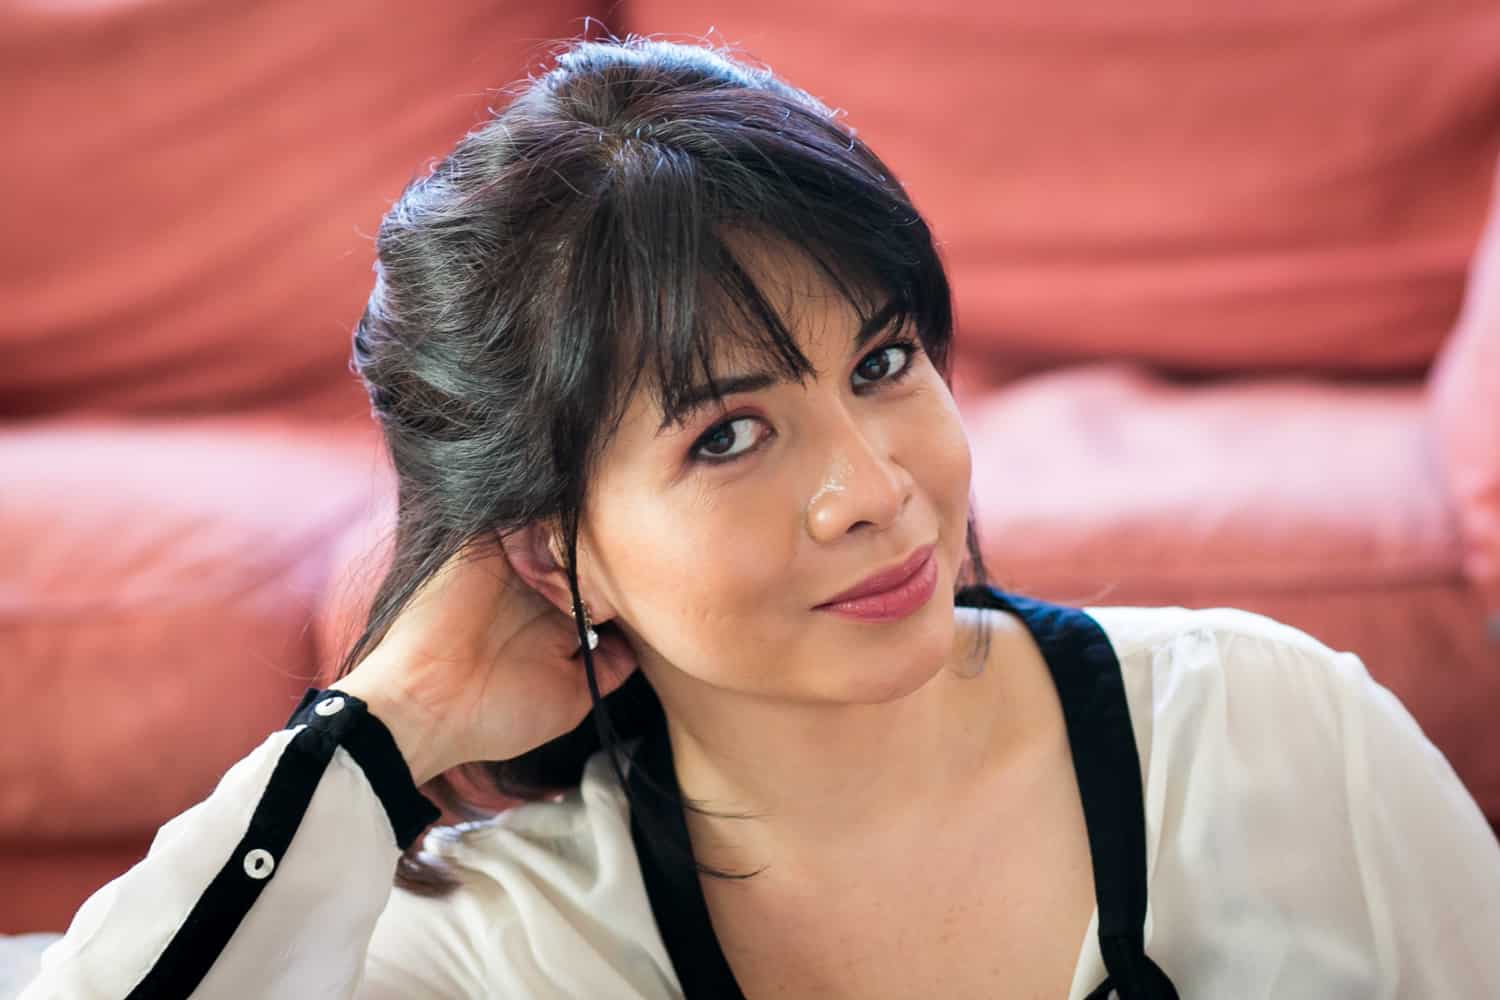 Woman with short black hair wearing black and white blouse